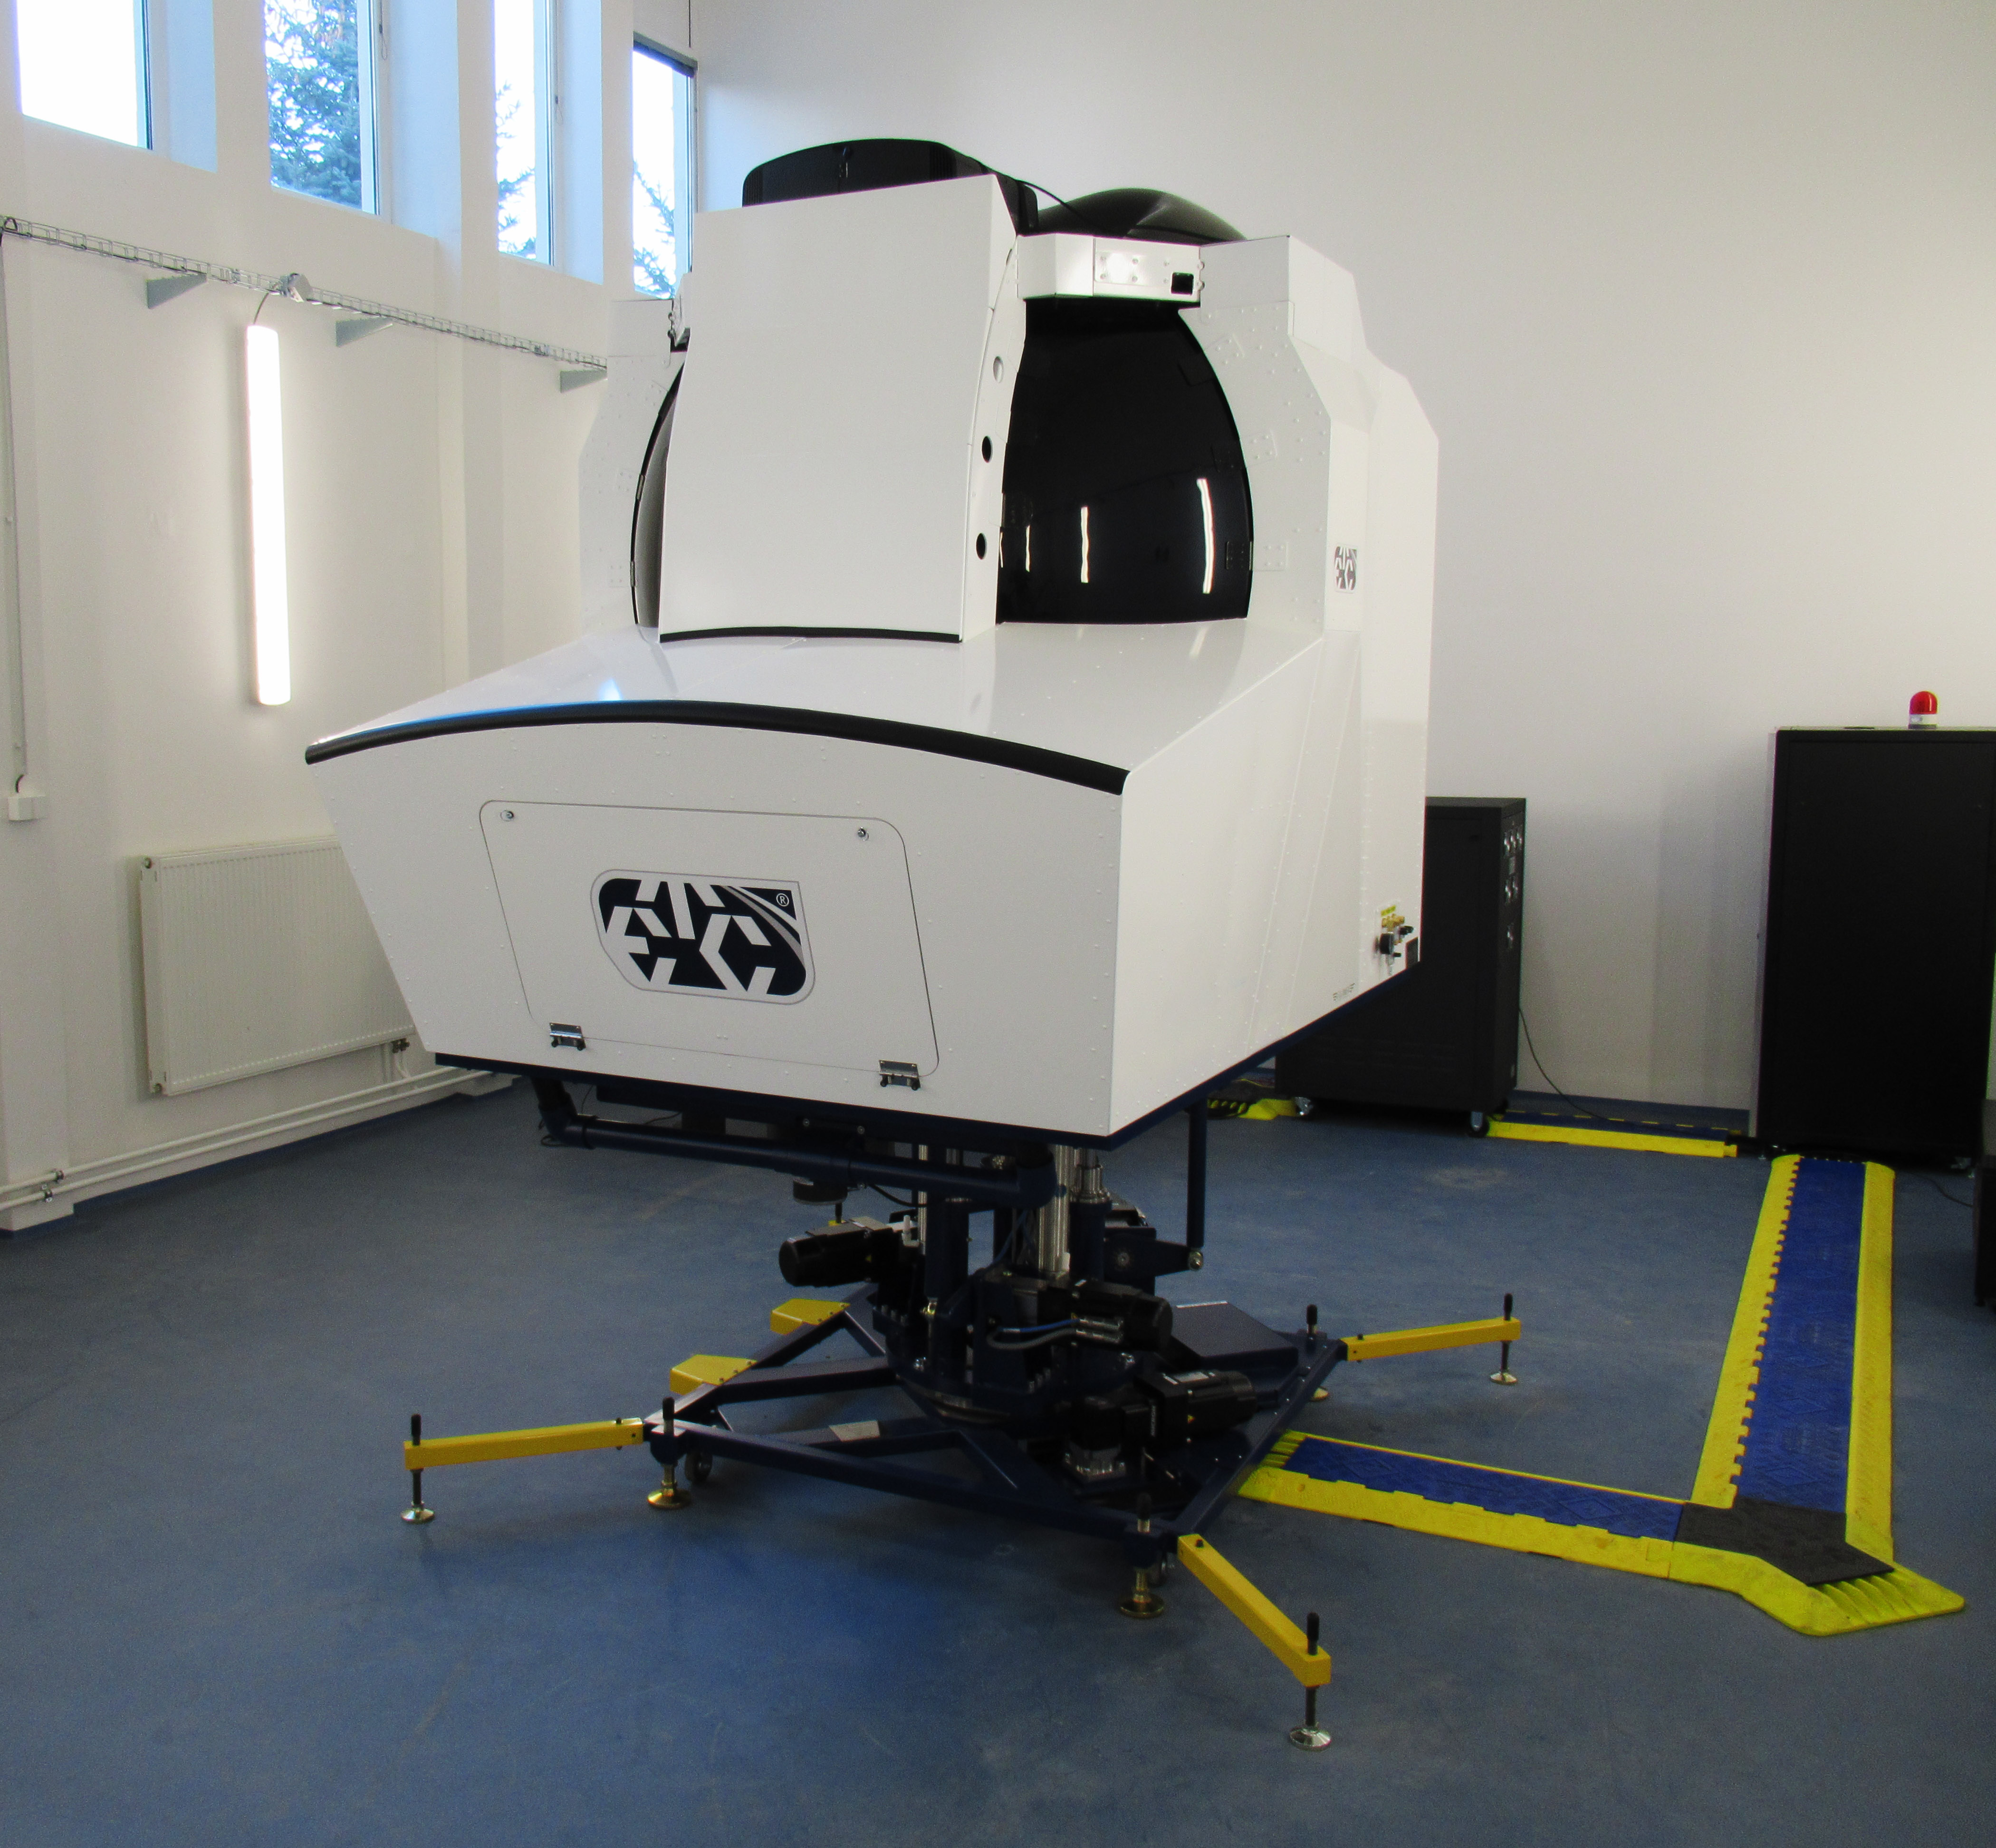 GH-200 Helicopter Spatial Disorientation Simulator